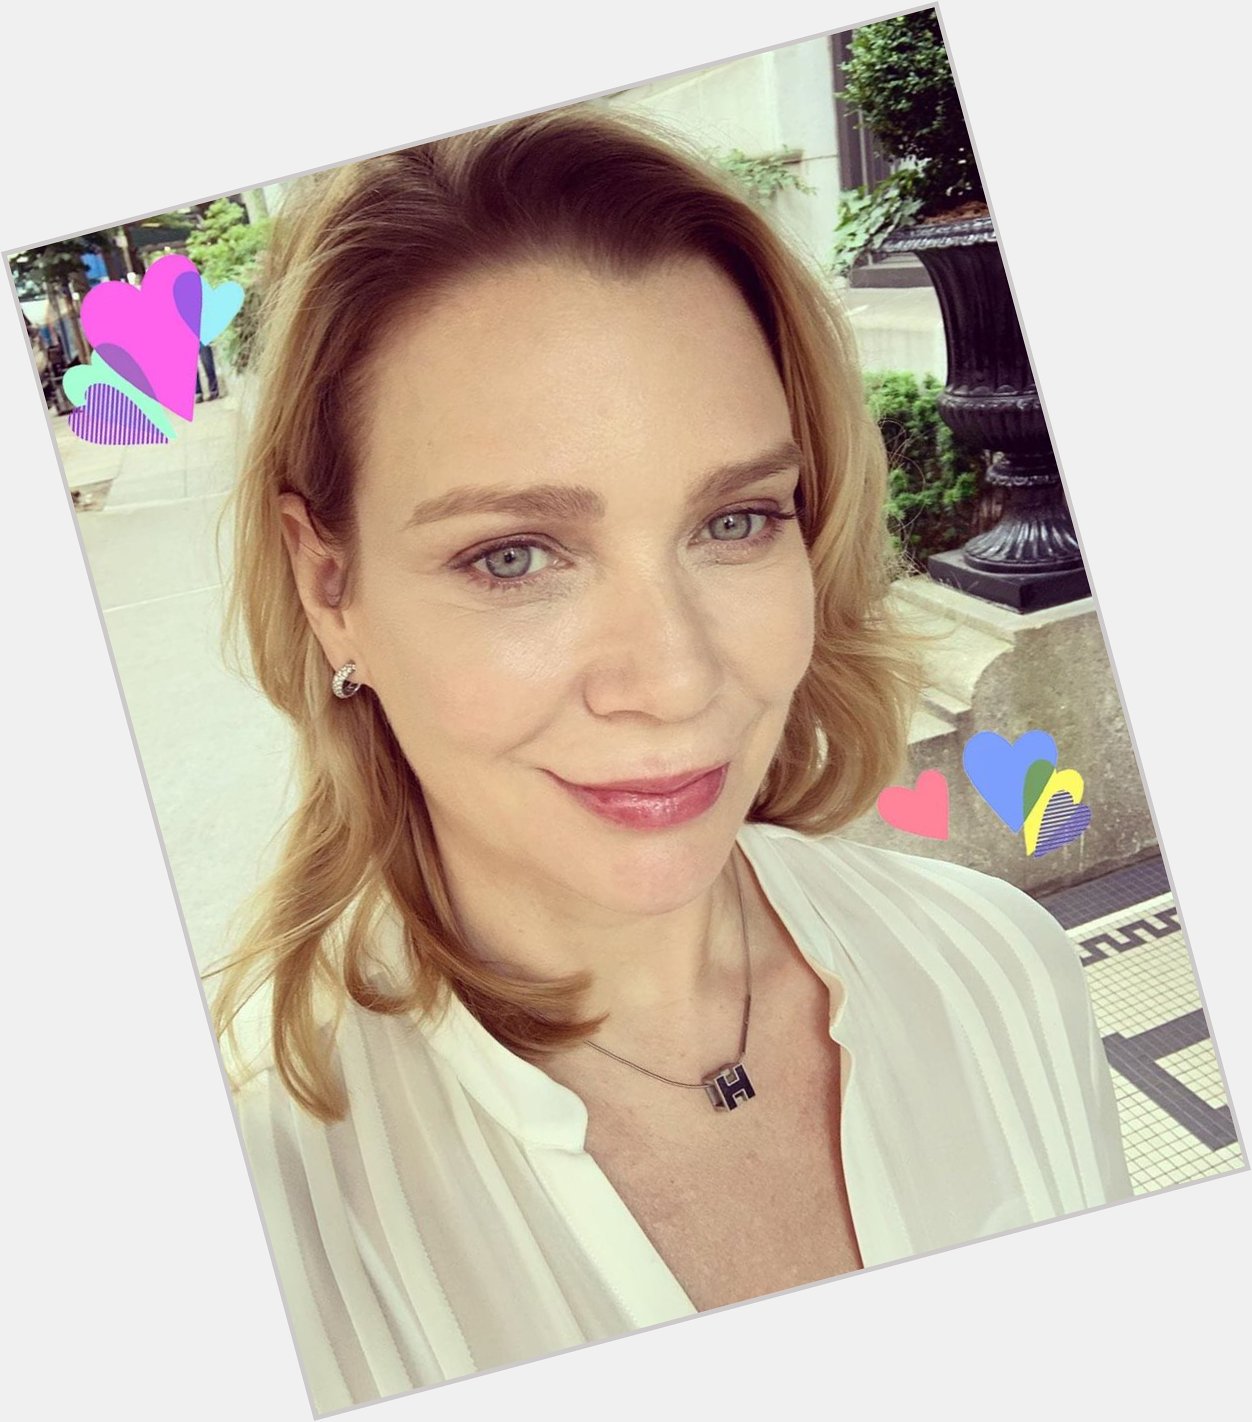 Today is a special day!

It\s Laurie Holden birthday.   Happy birthday Laurie  